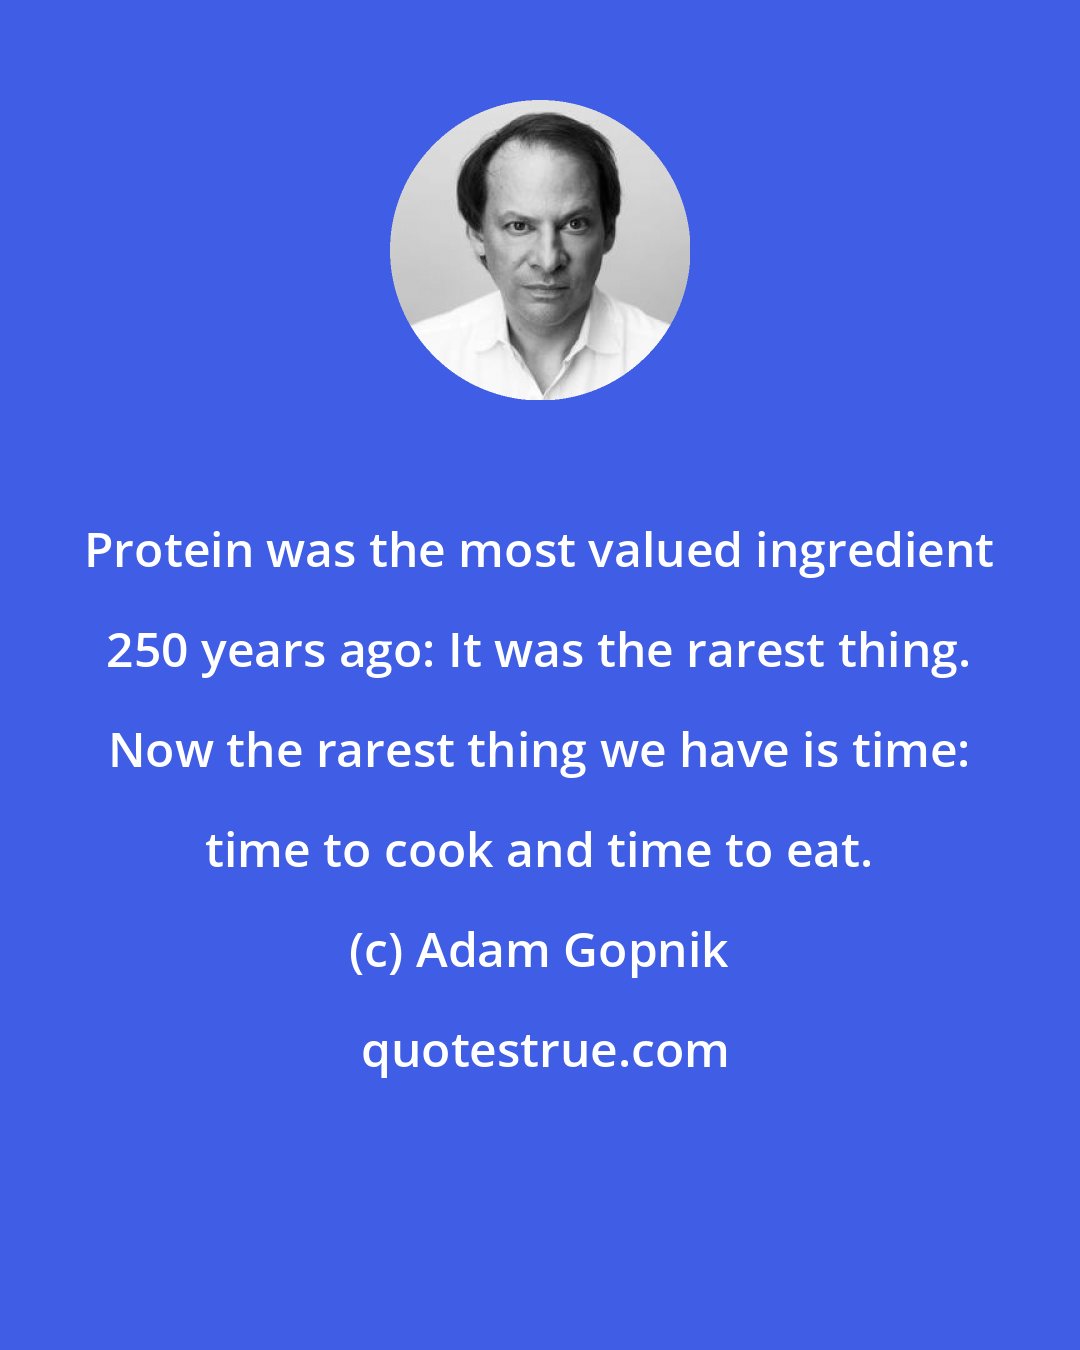 Adam Gopnik: Protein was the most valued ingredient 250 years ago: It was the rarest thing. Now the rarest thing we have is time: time to cook and time to eat.